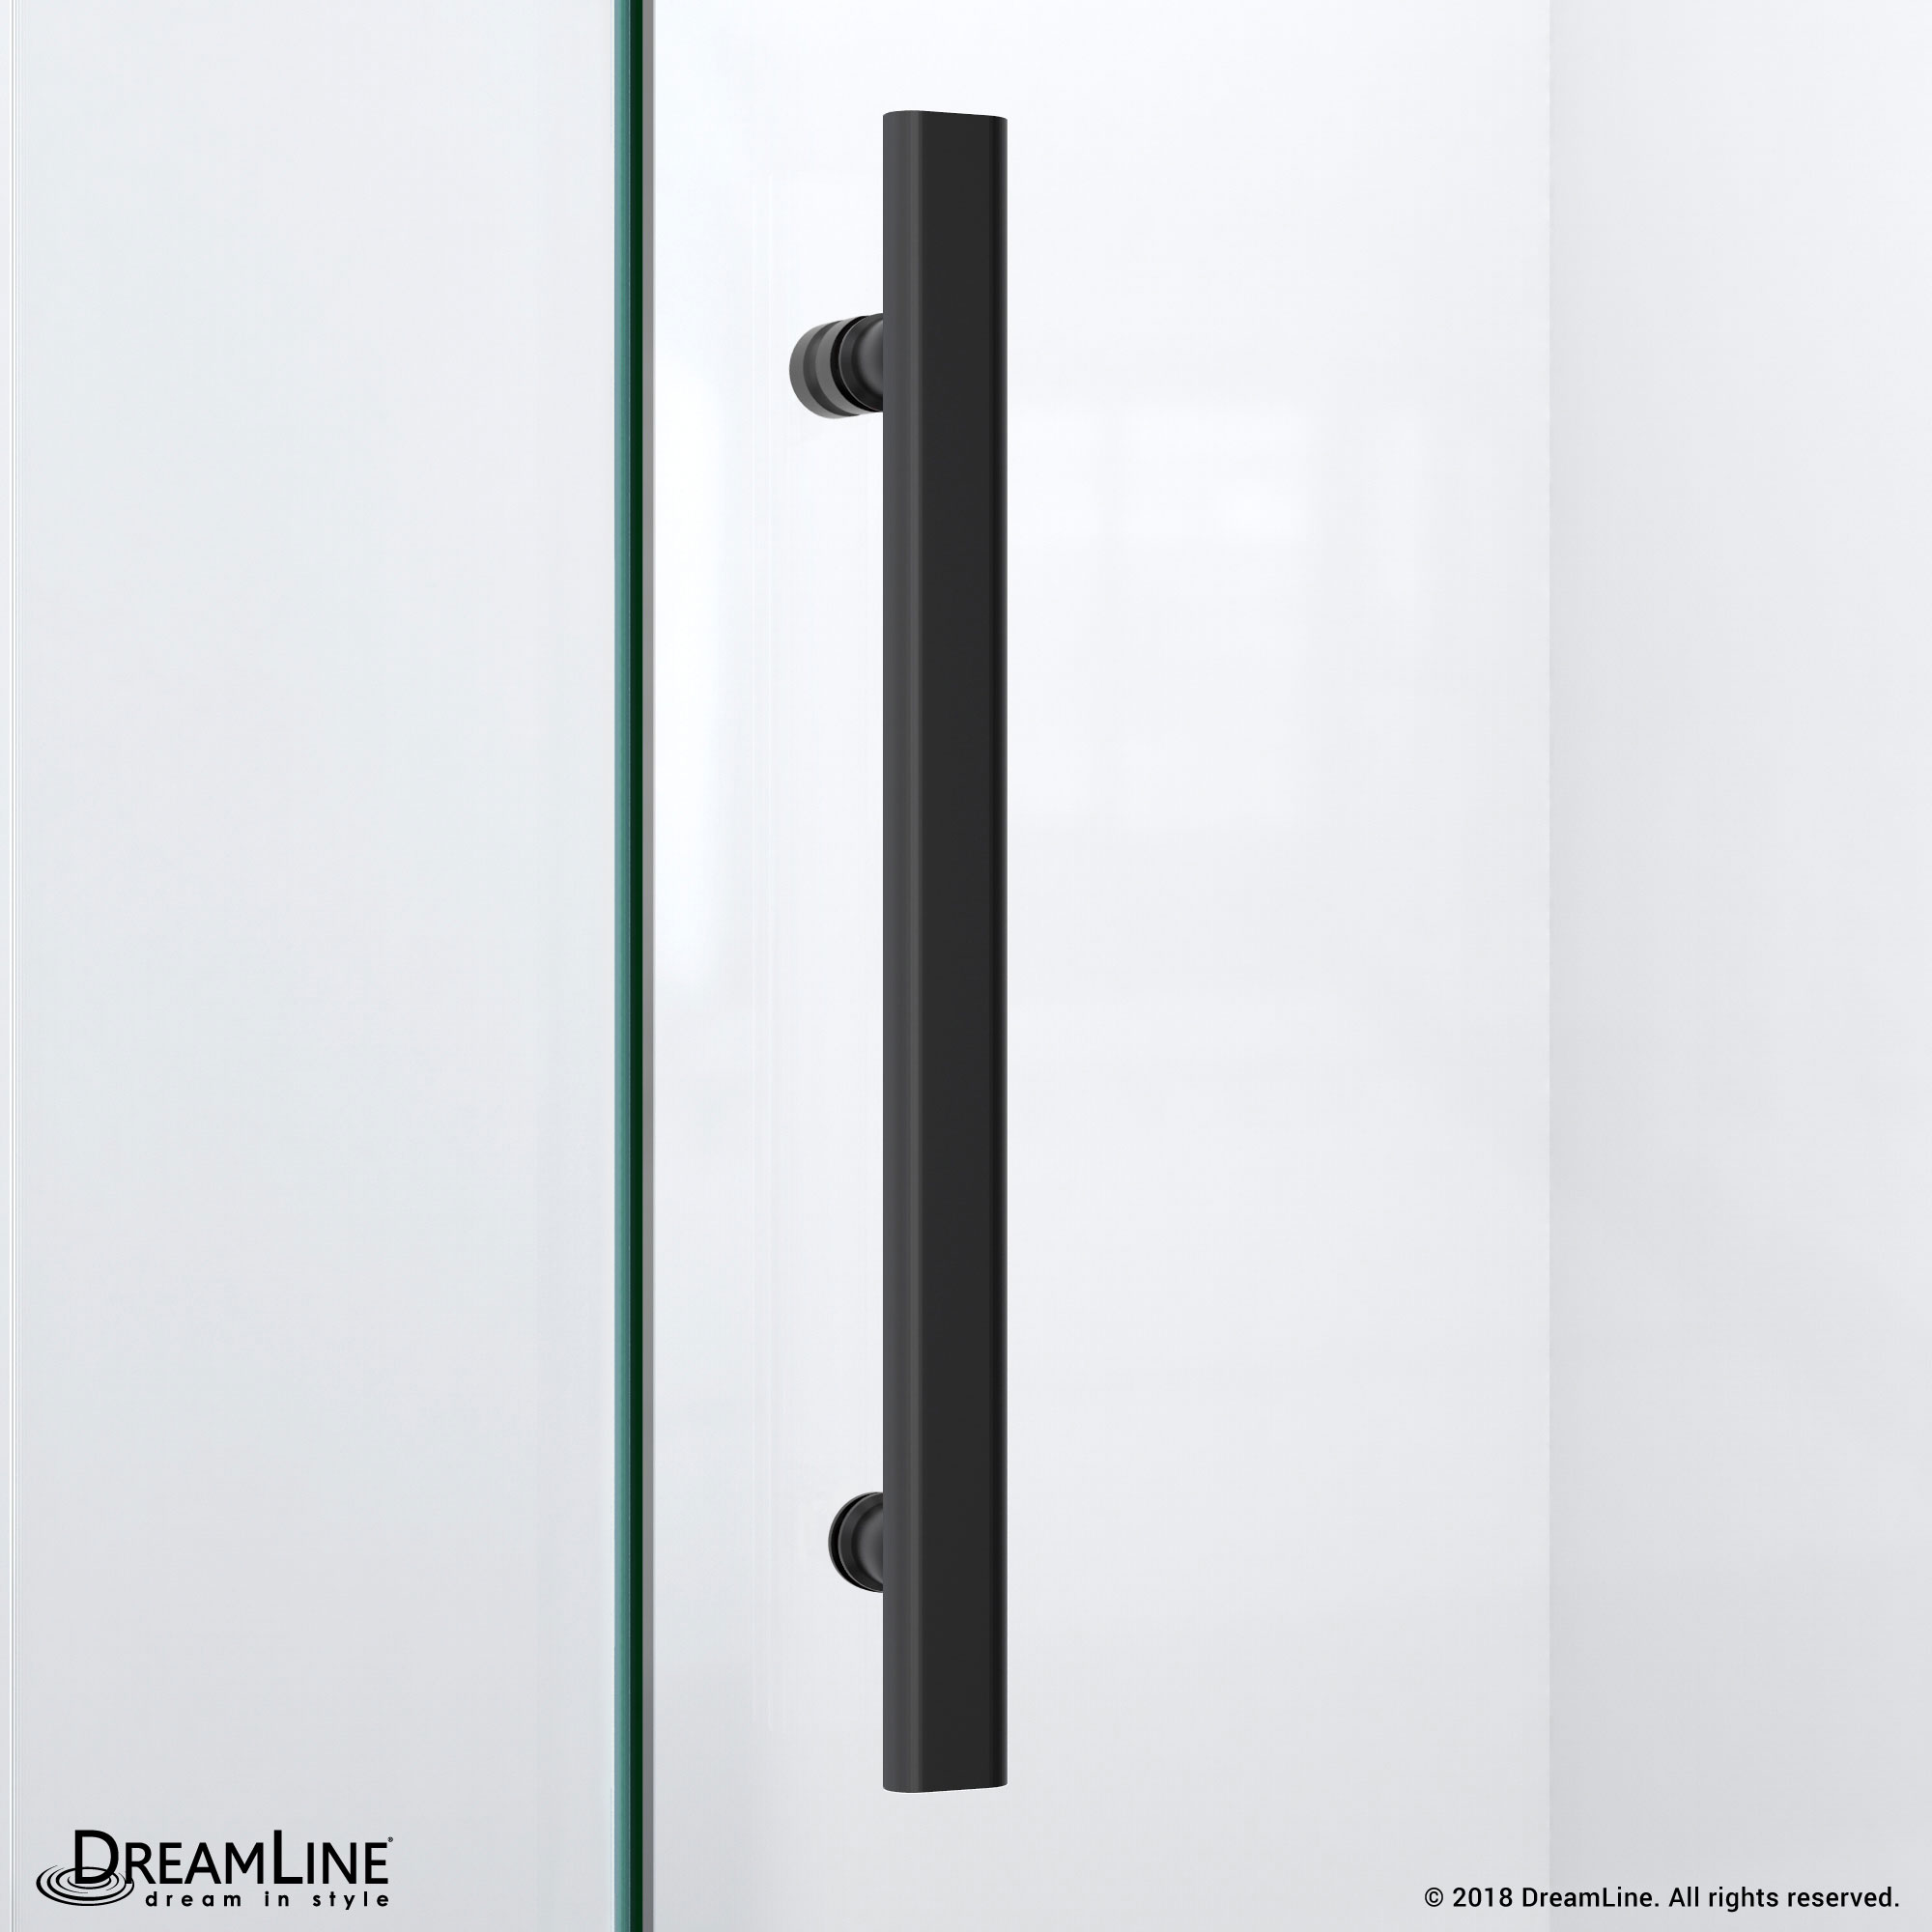 DreamLine Prism Lux 36 in. D x 36 in. W x 74 3/4 in. H Hinged Shower Enclosure in Satin Black with Corner Drain White Base Kit